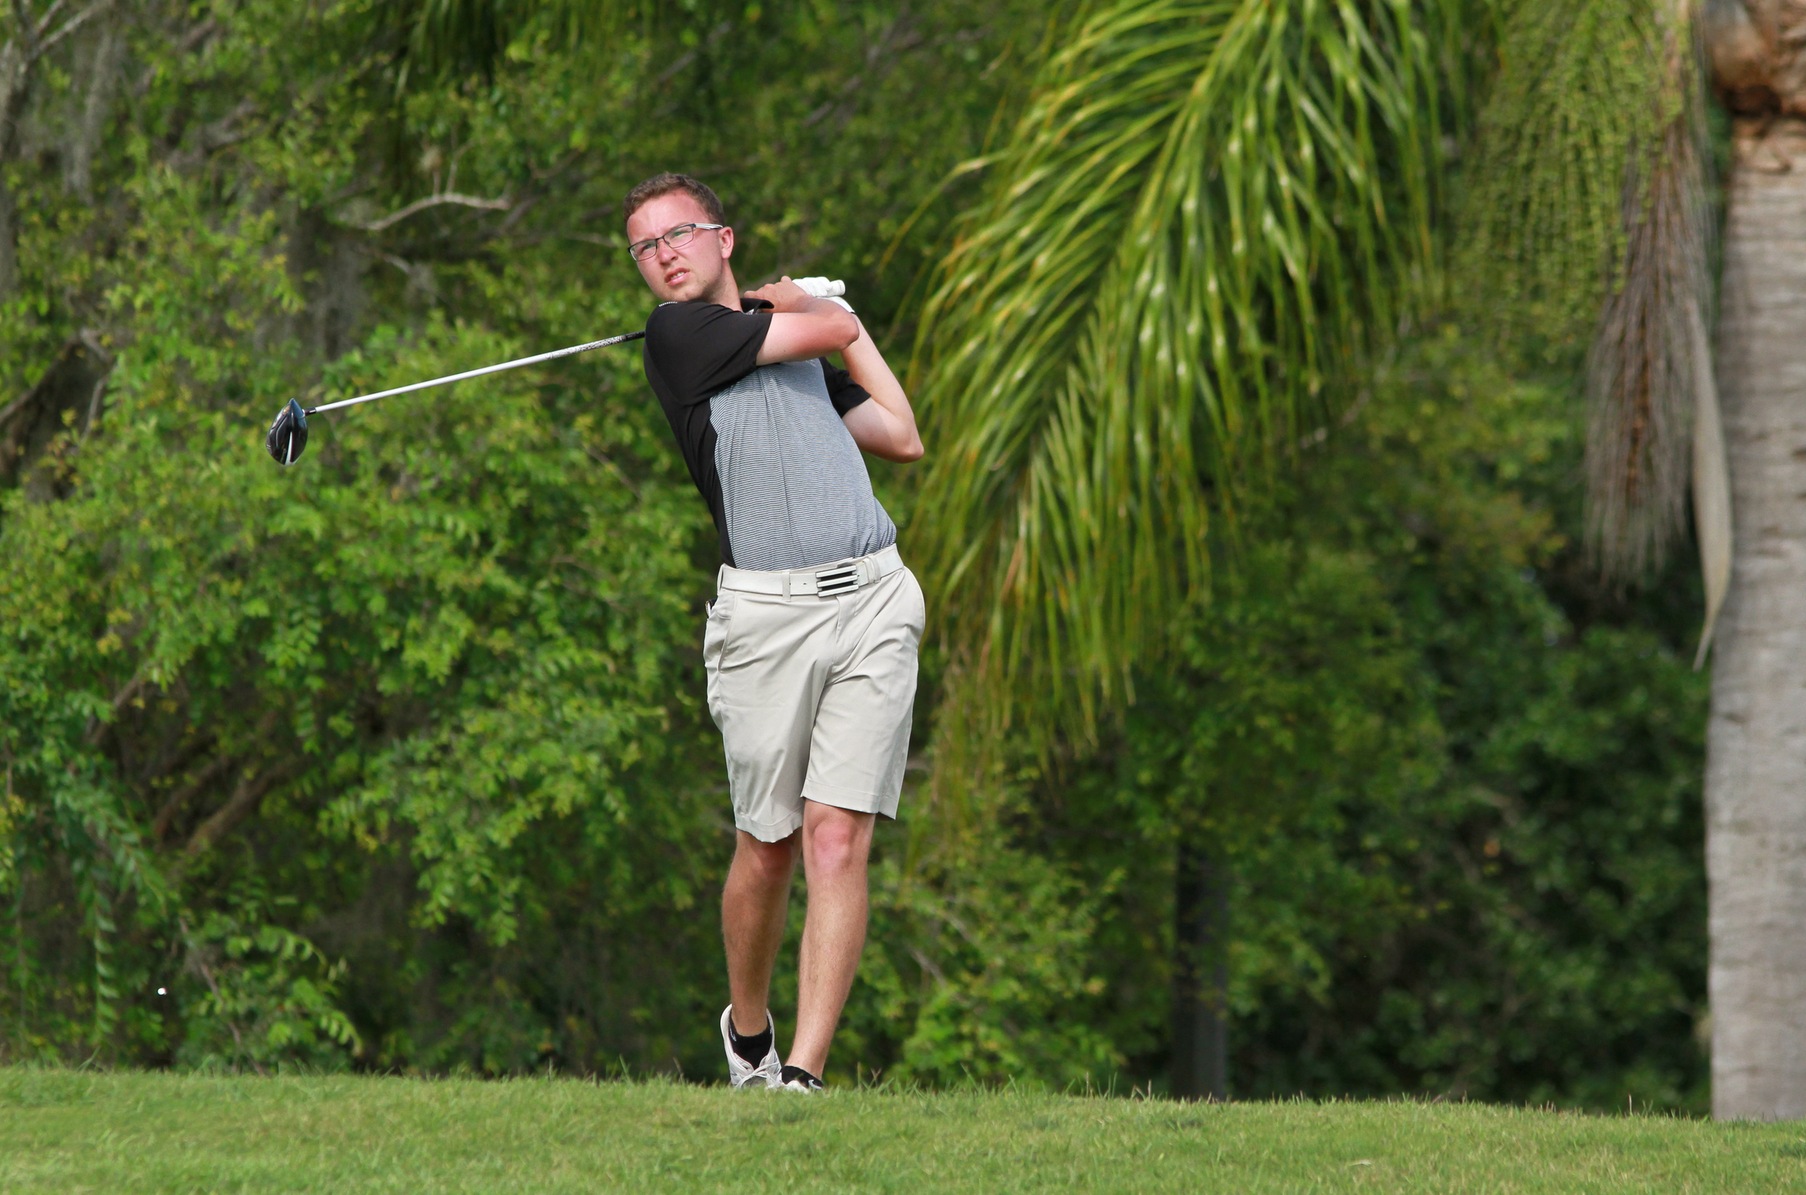 Junior Hunter Wescott sits atop 63 golfers with a first round score of 68 at the St. Thomas Aquinas Spring Invite.